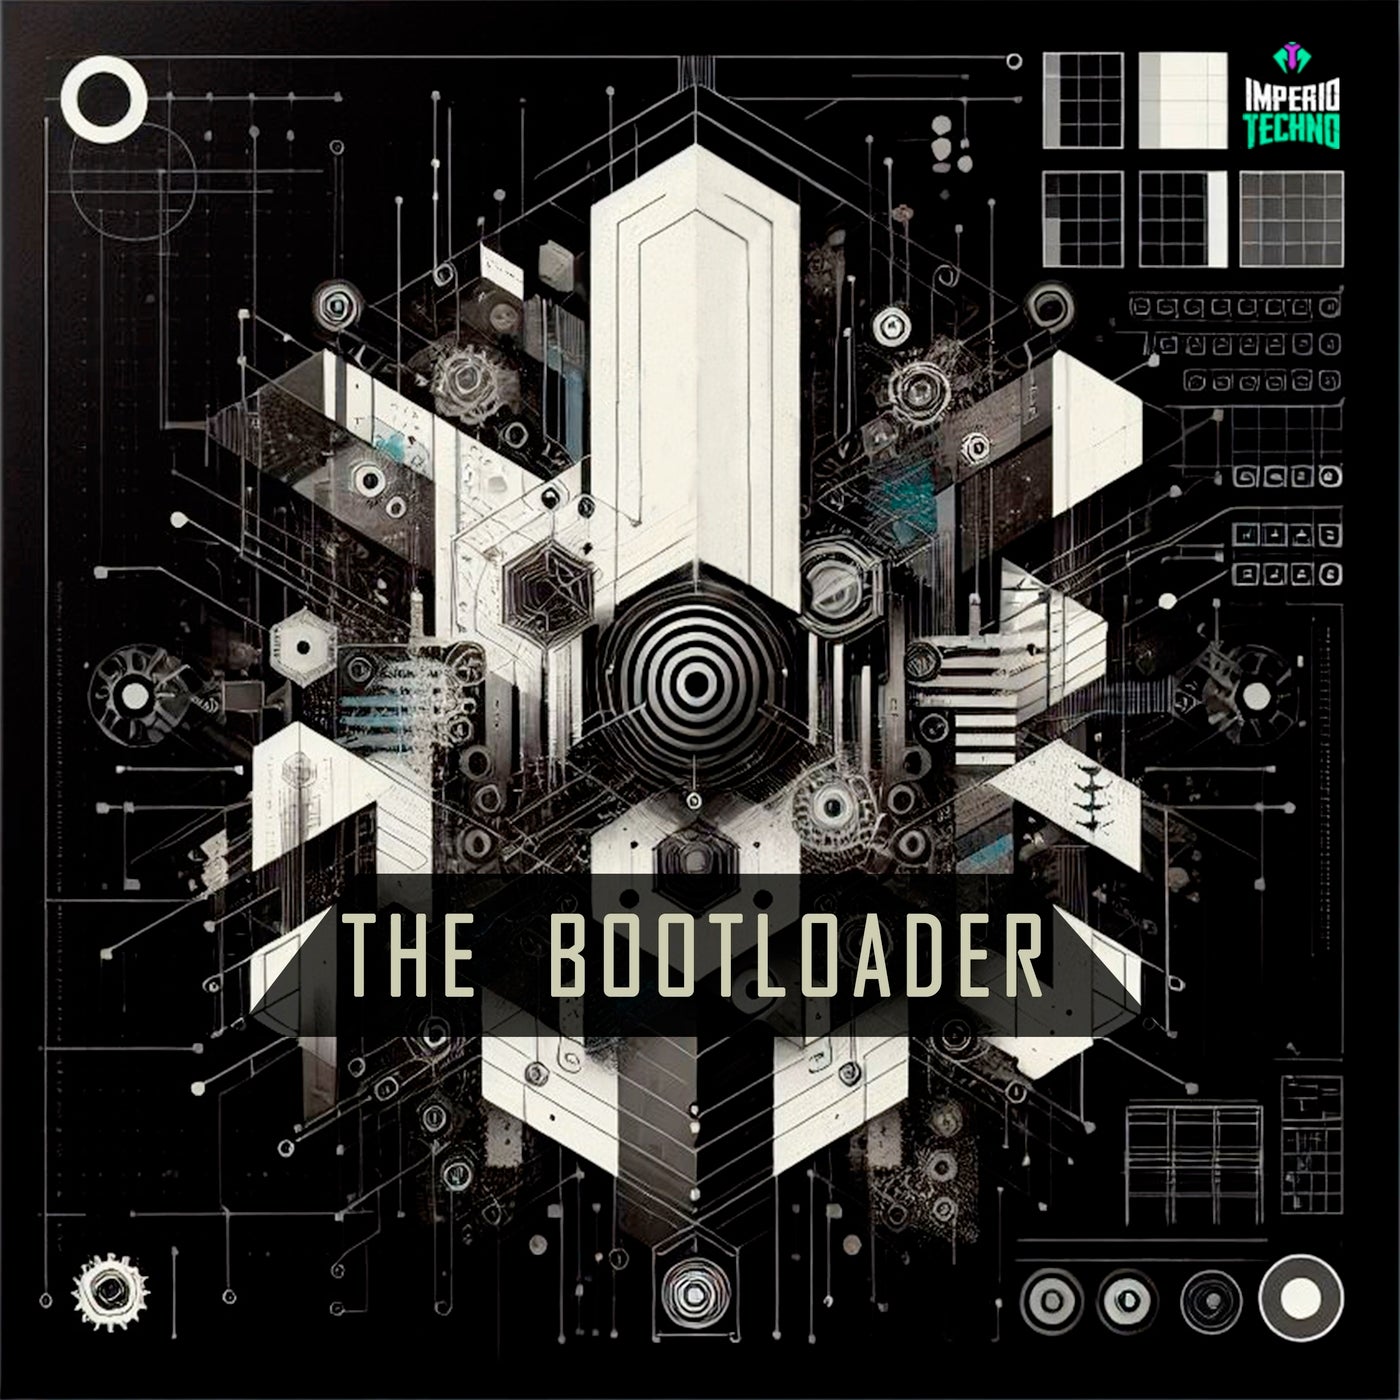 The Bootloader